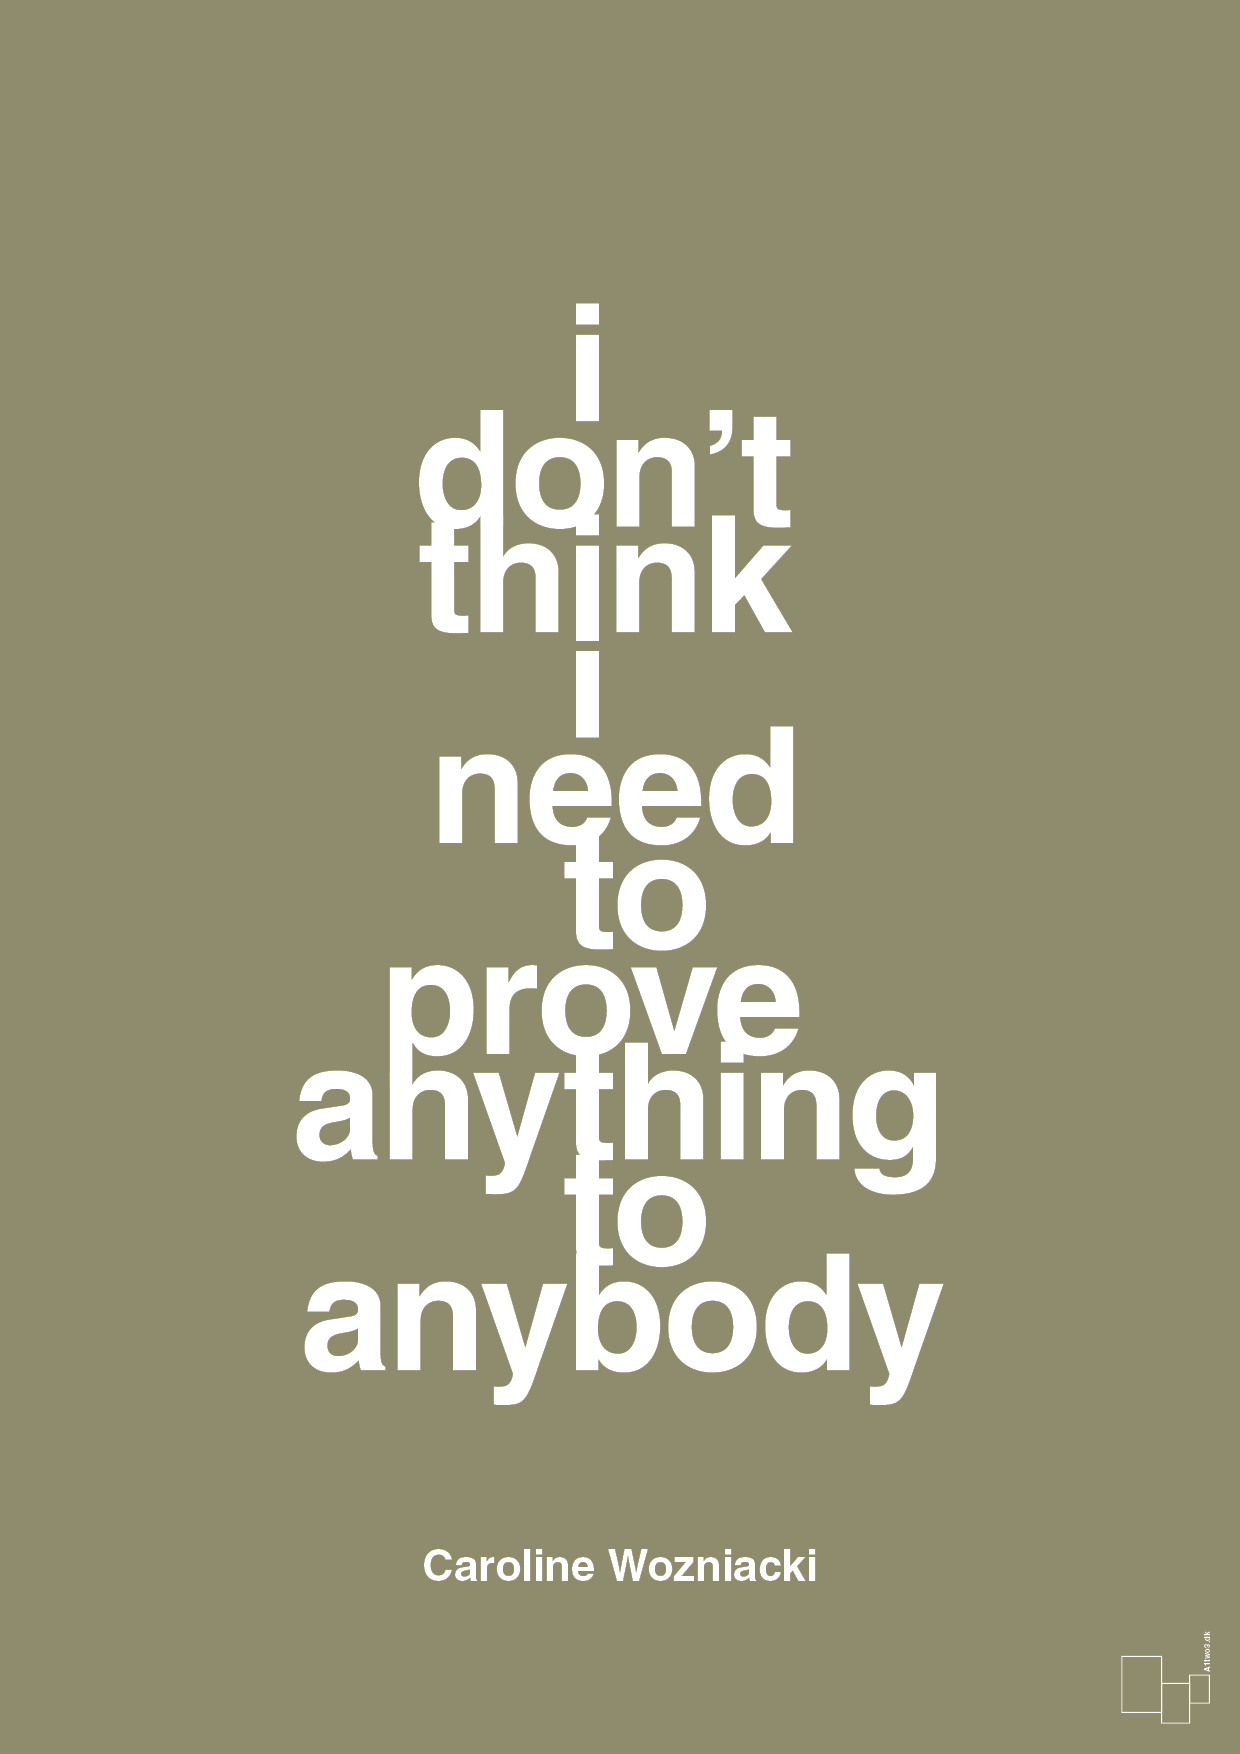 i don’t think i need to prove anything to anybody - Plakat med Citater i Misty Forrest